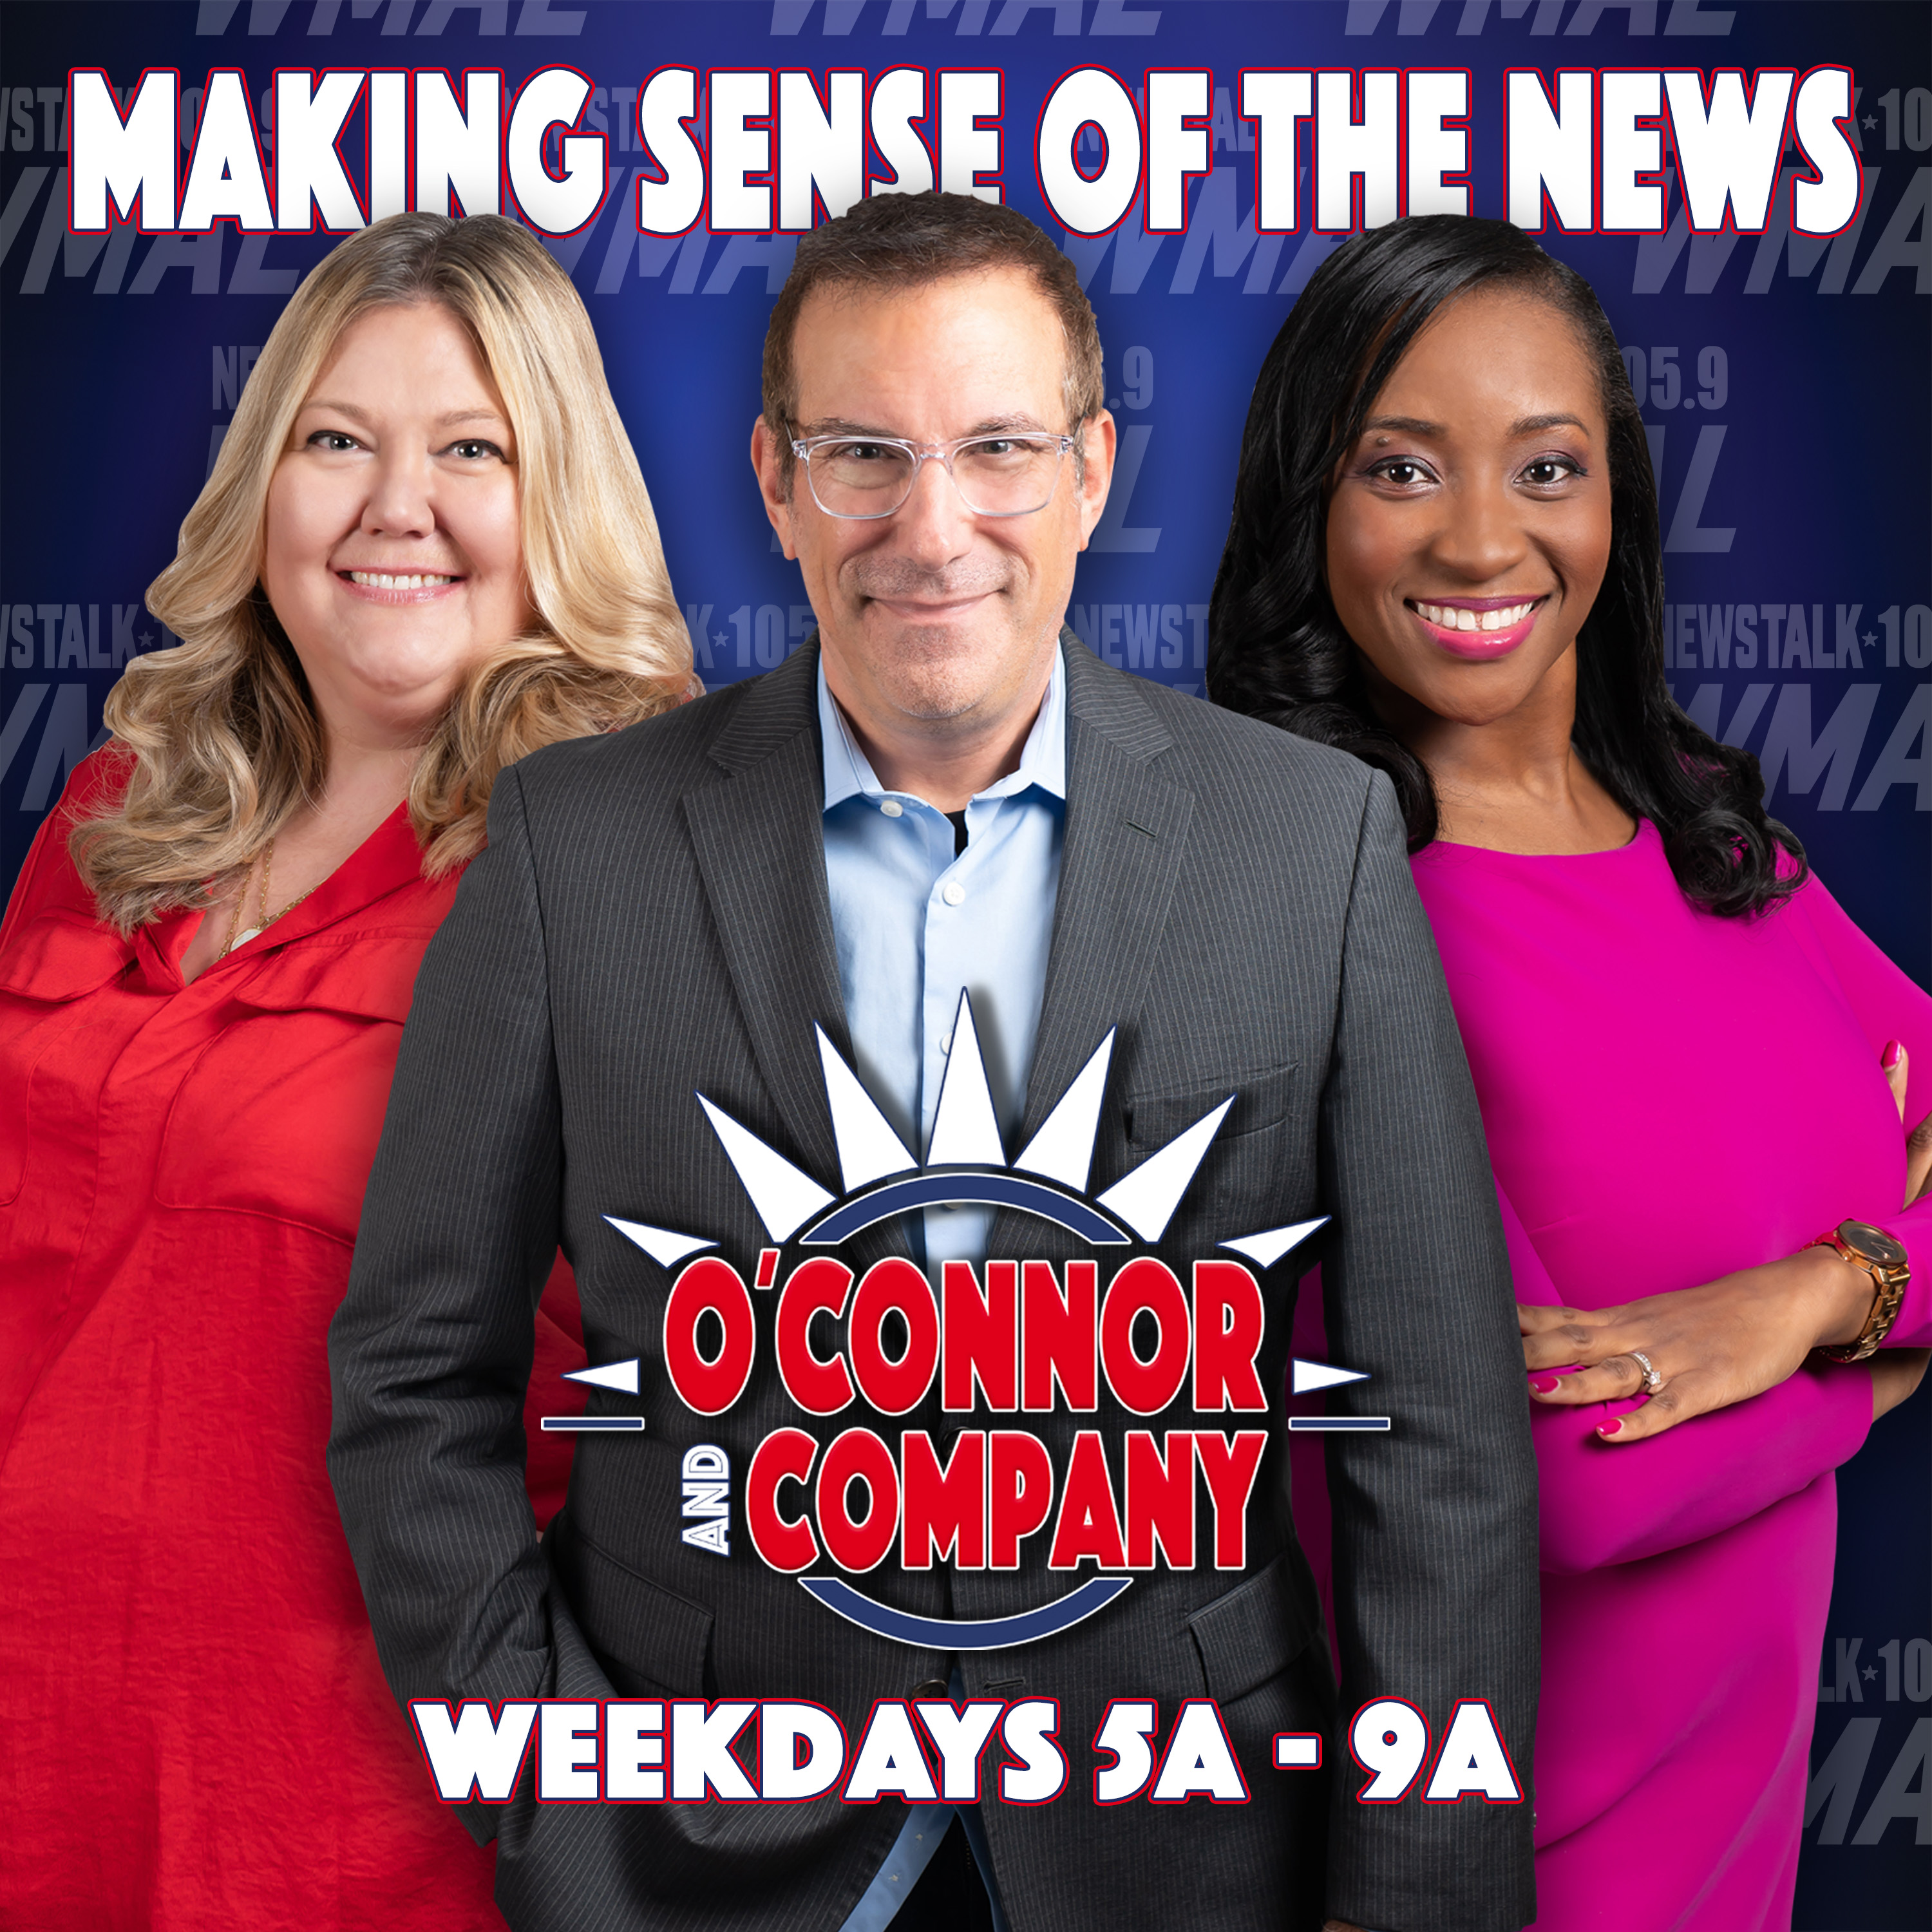 01.18.22: Big O'Connor and Company Announcement On WMAL